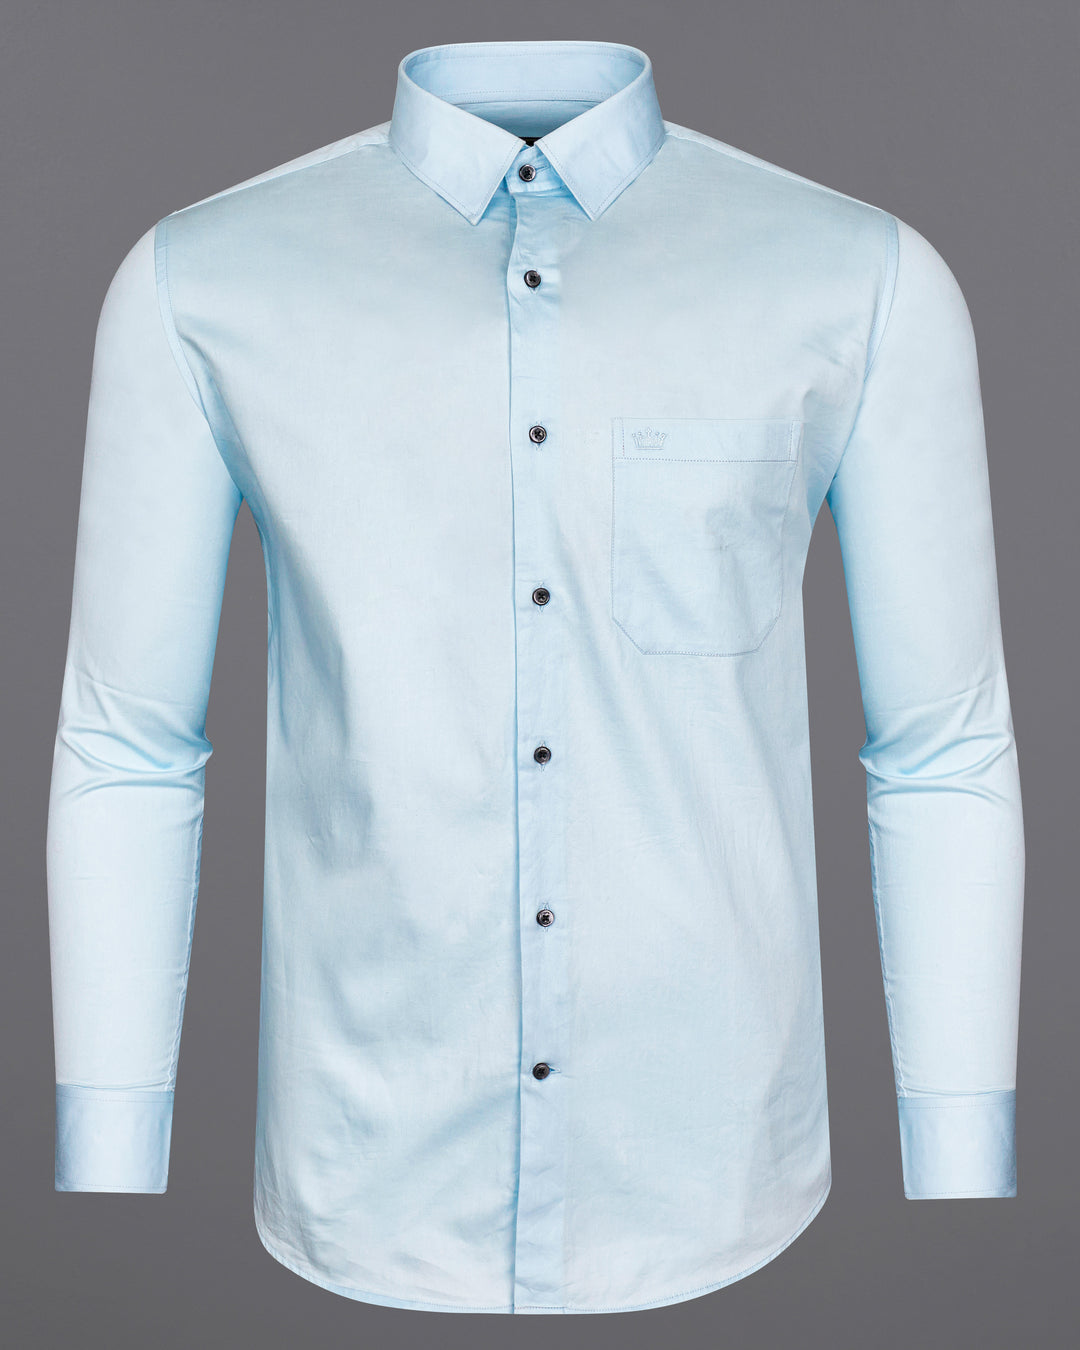 10 Best Shirt Colors For Men To Lights Up The Personality